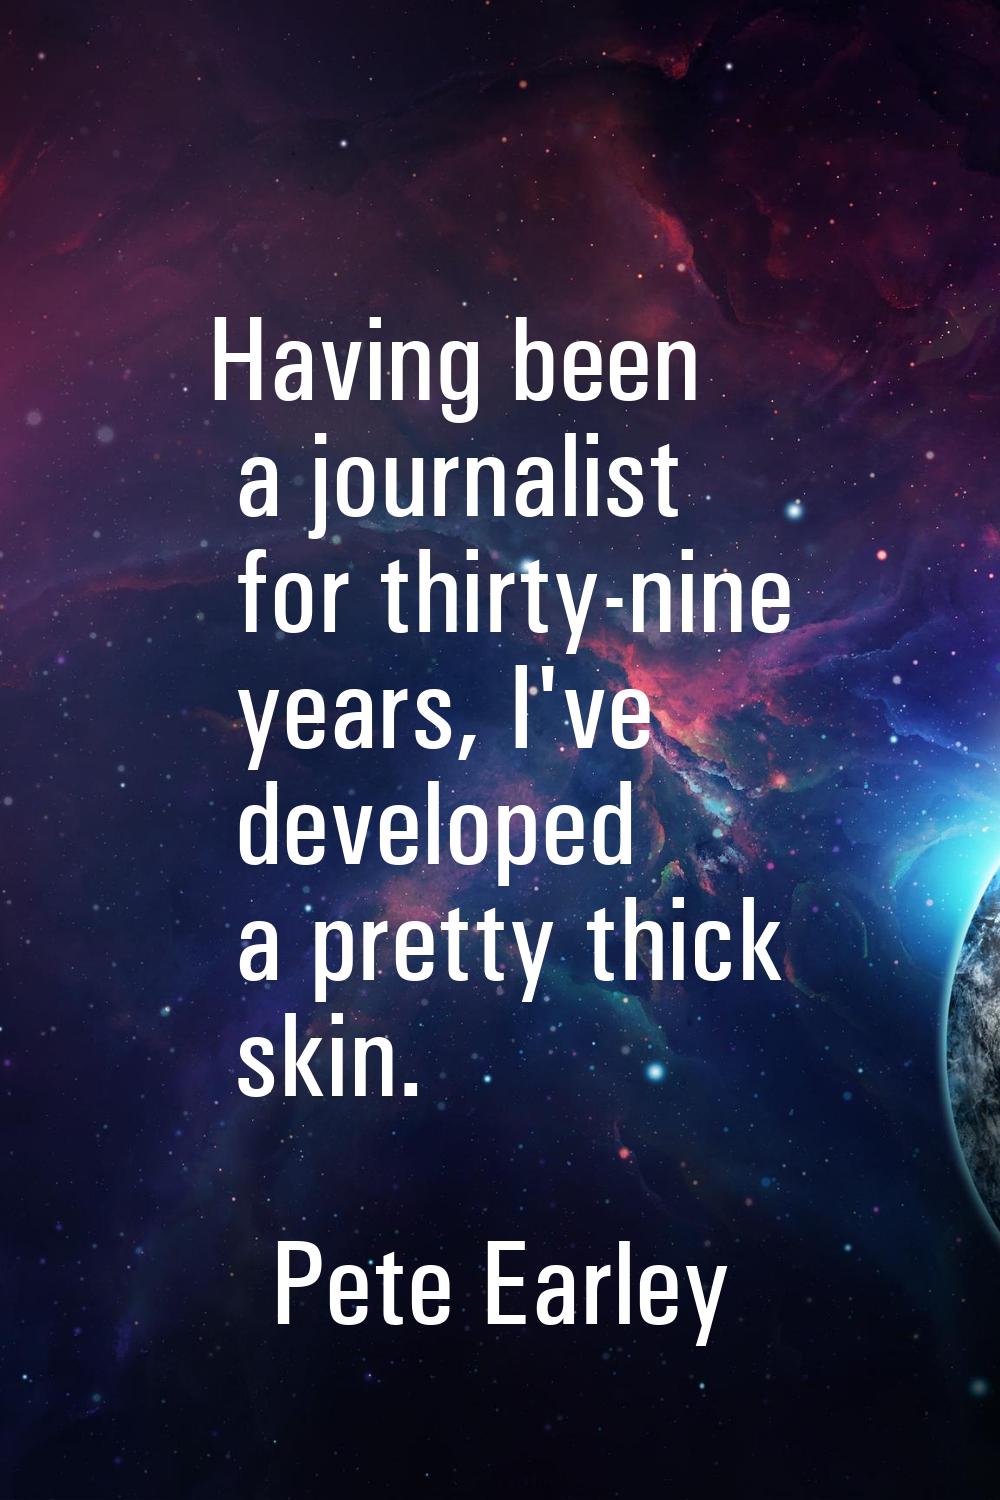 Having been a journalist for thirty-nine years, I've developed a pretty thick skin.